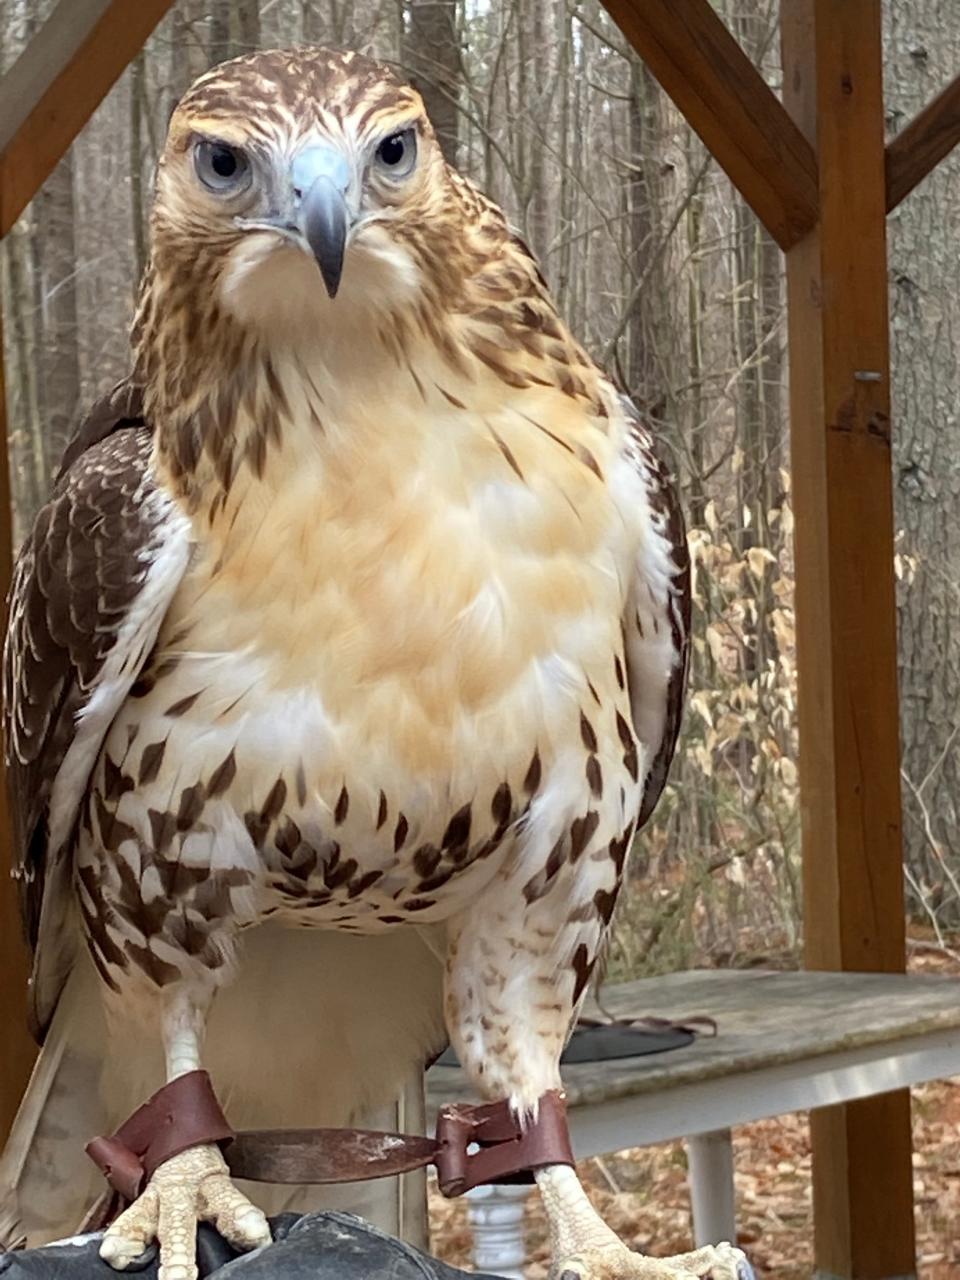 PIsces is a rescued immature red-tailed hawk and an educational ambassador for the Center for Wildlife in Cape Neddick, Maine.